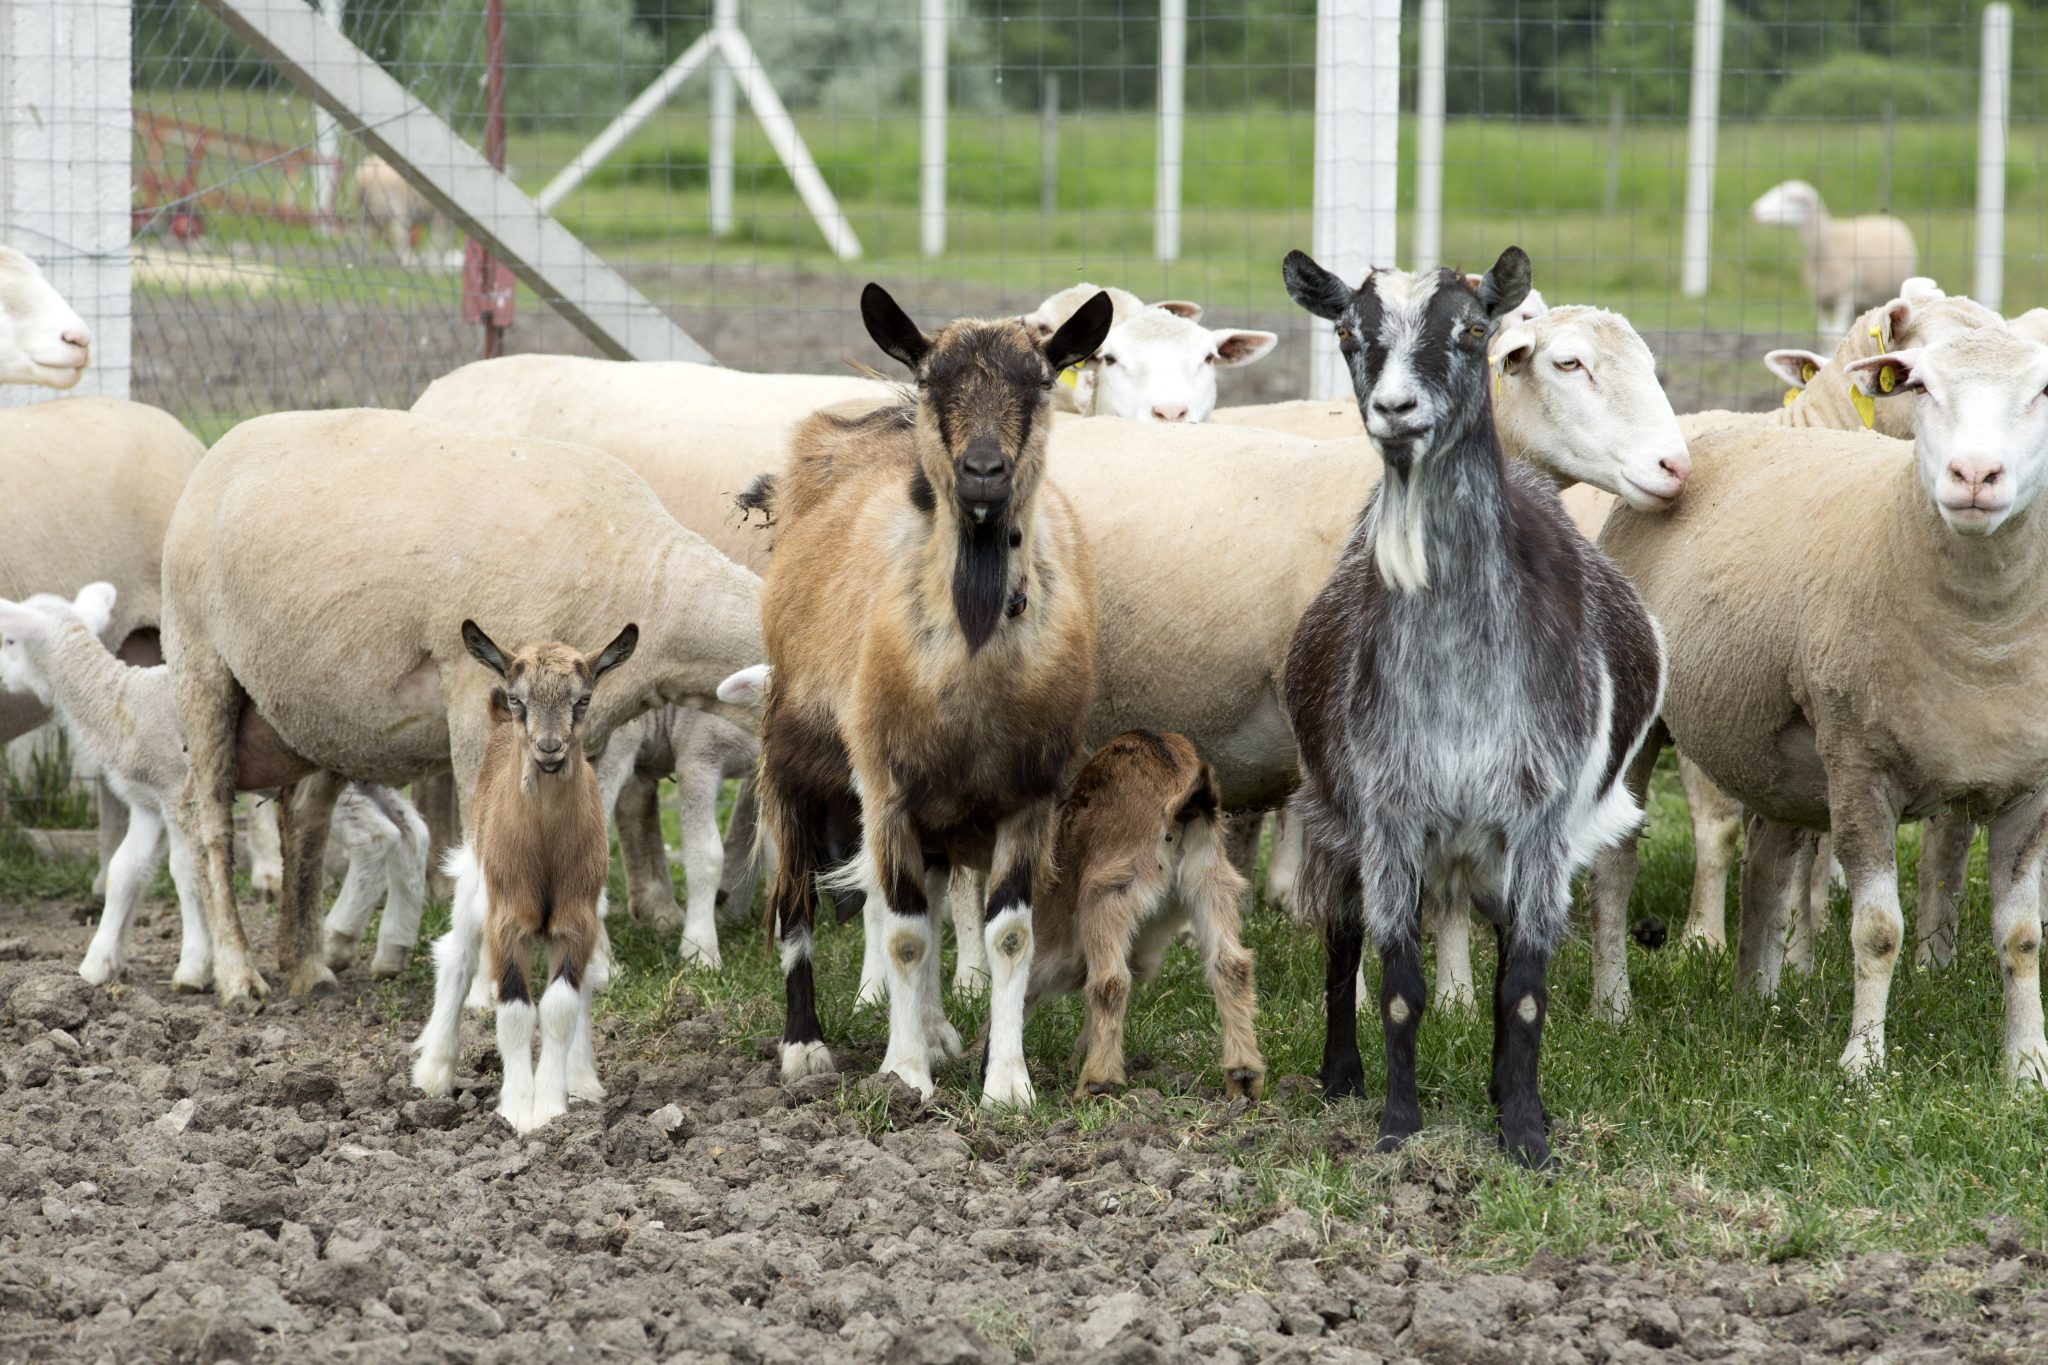 Goats and sheep outdoor on a farm